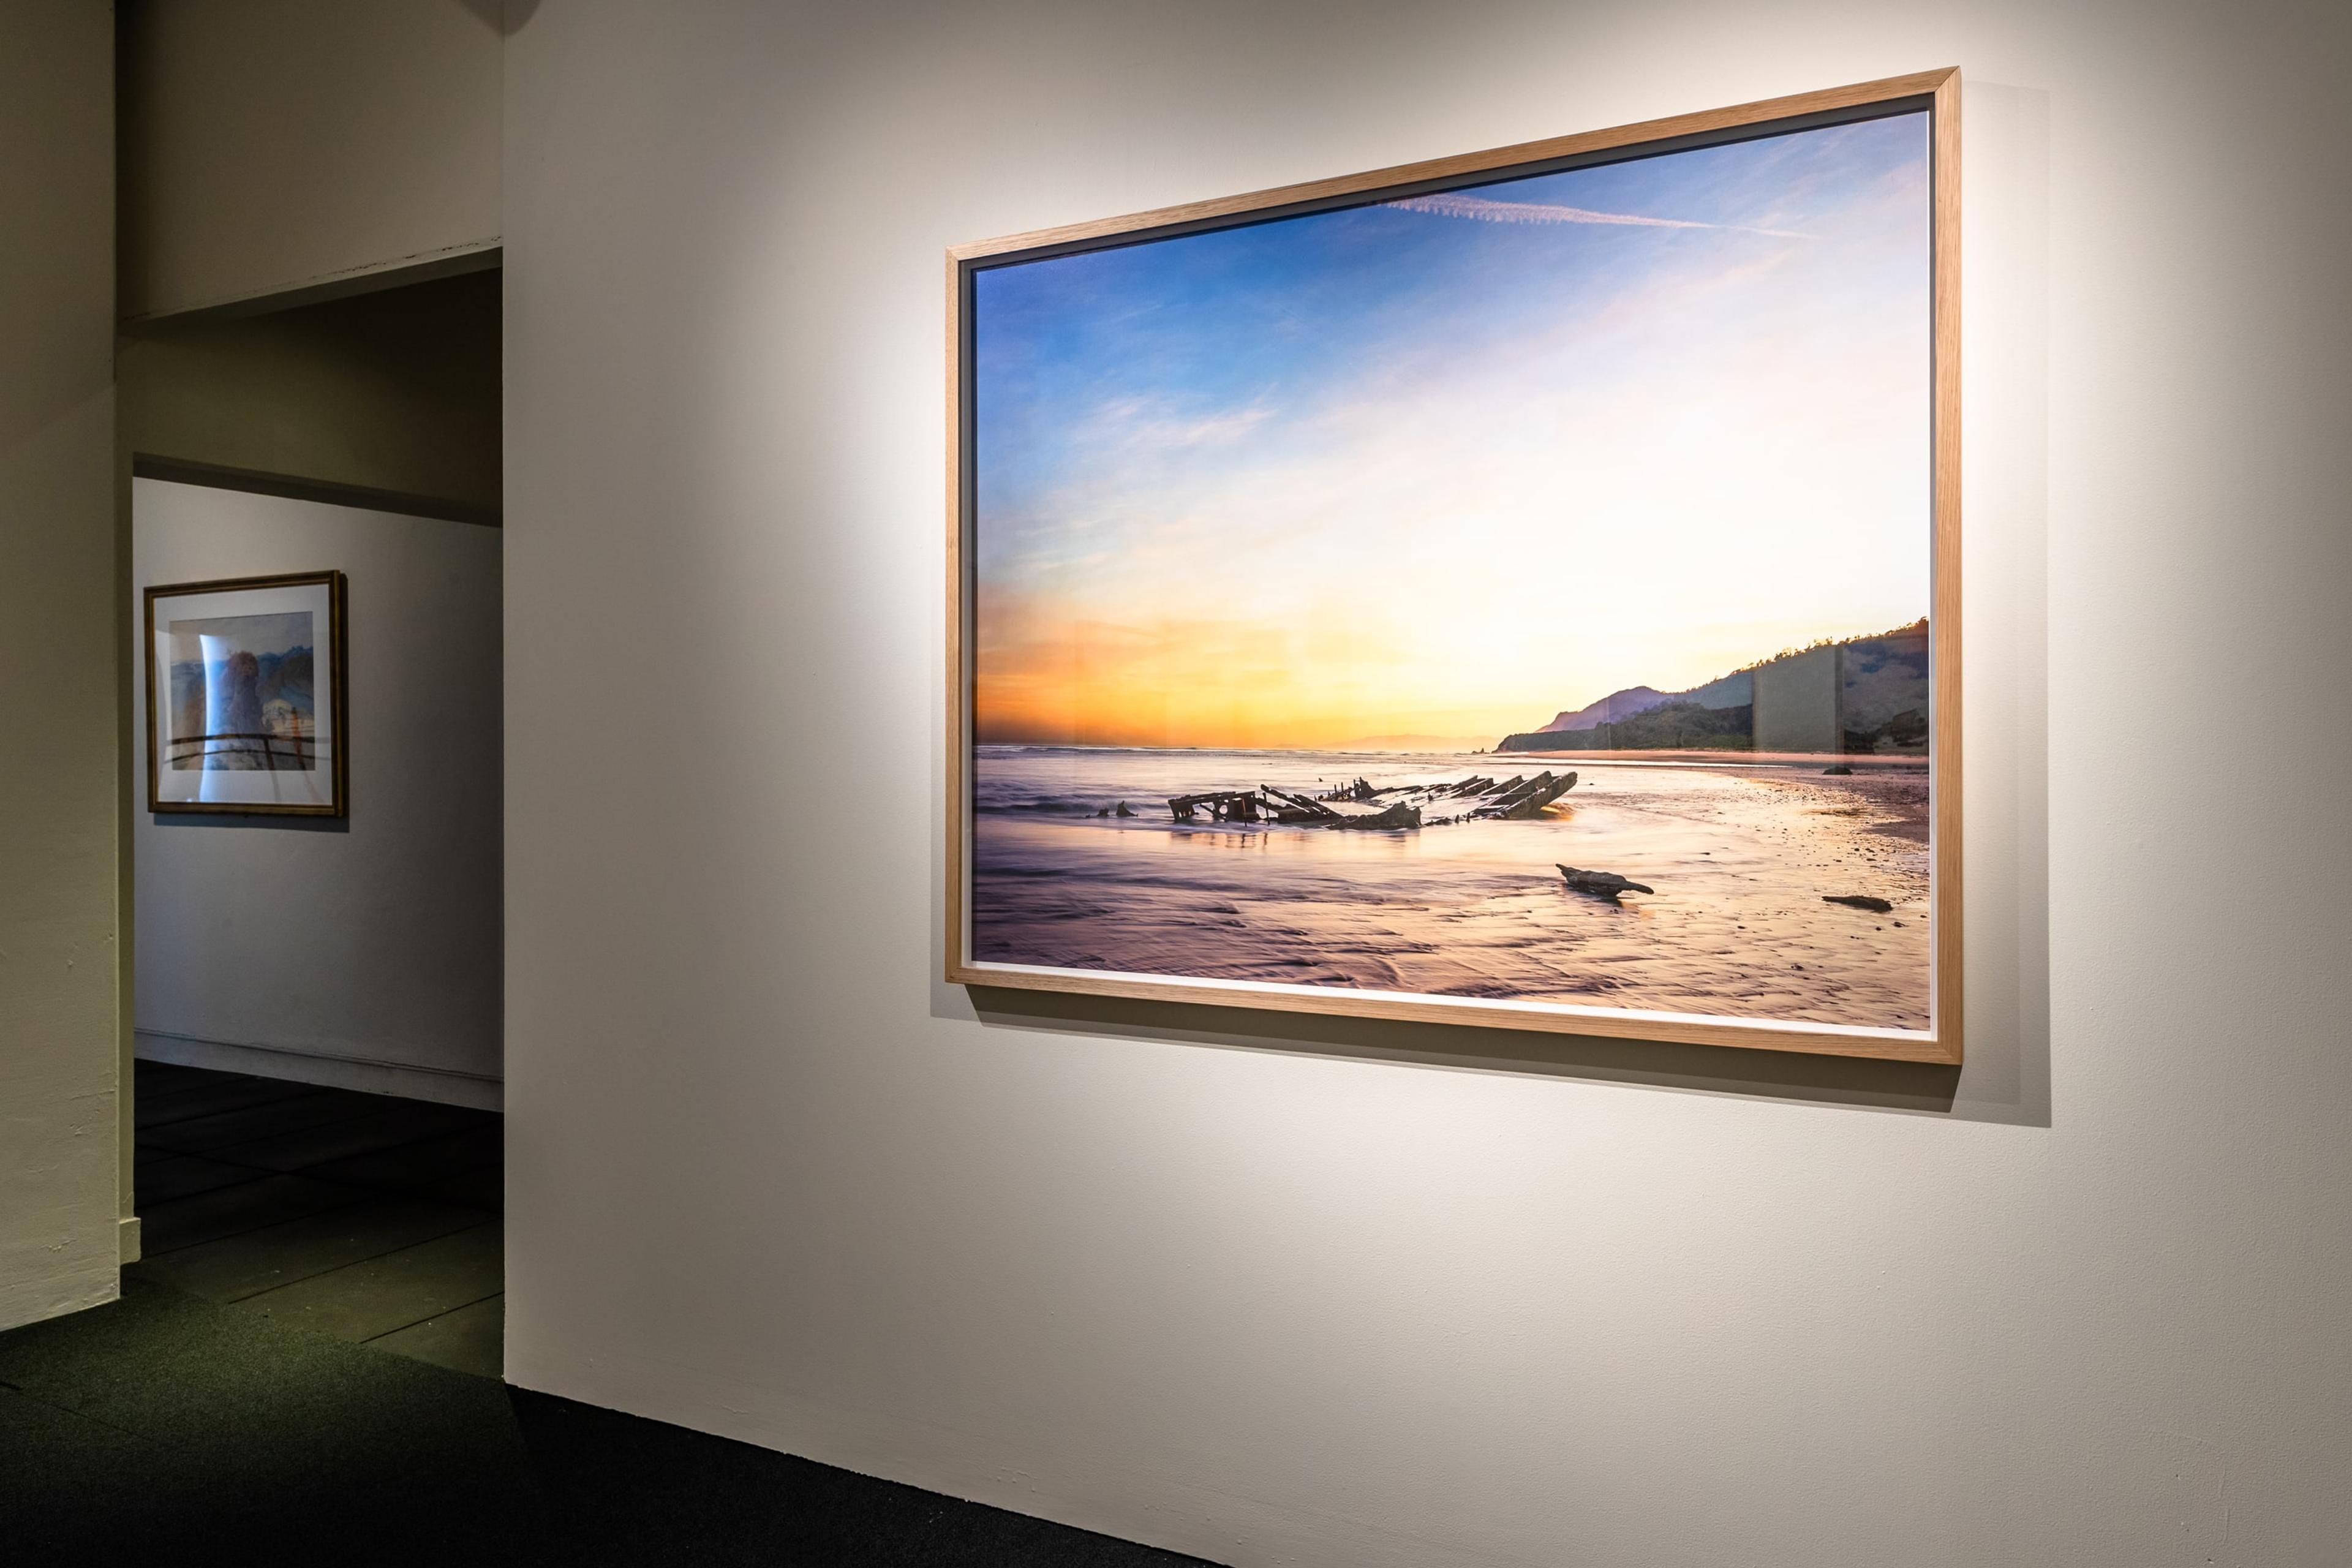 Chris Corson Scott, Winter Morning, Remains of the Coal Barge SS Lawrence, Mokihinui, 2016, archival pigment print. Courtesy of the artist and Trish Clark Gallery, Auckland. Installation view, Tēnei Ao Tūroa – This Enduring World, Te Pātaka Toi Adam Art Gallery, Victoria University Wellington. Photo: Ted Whitaker